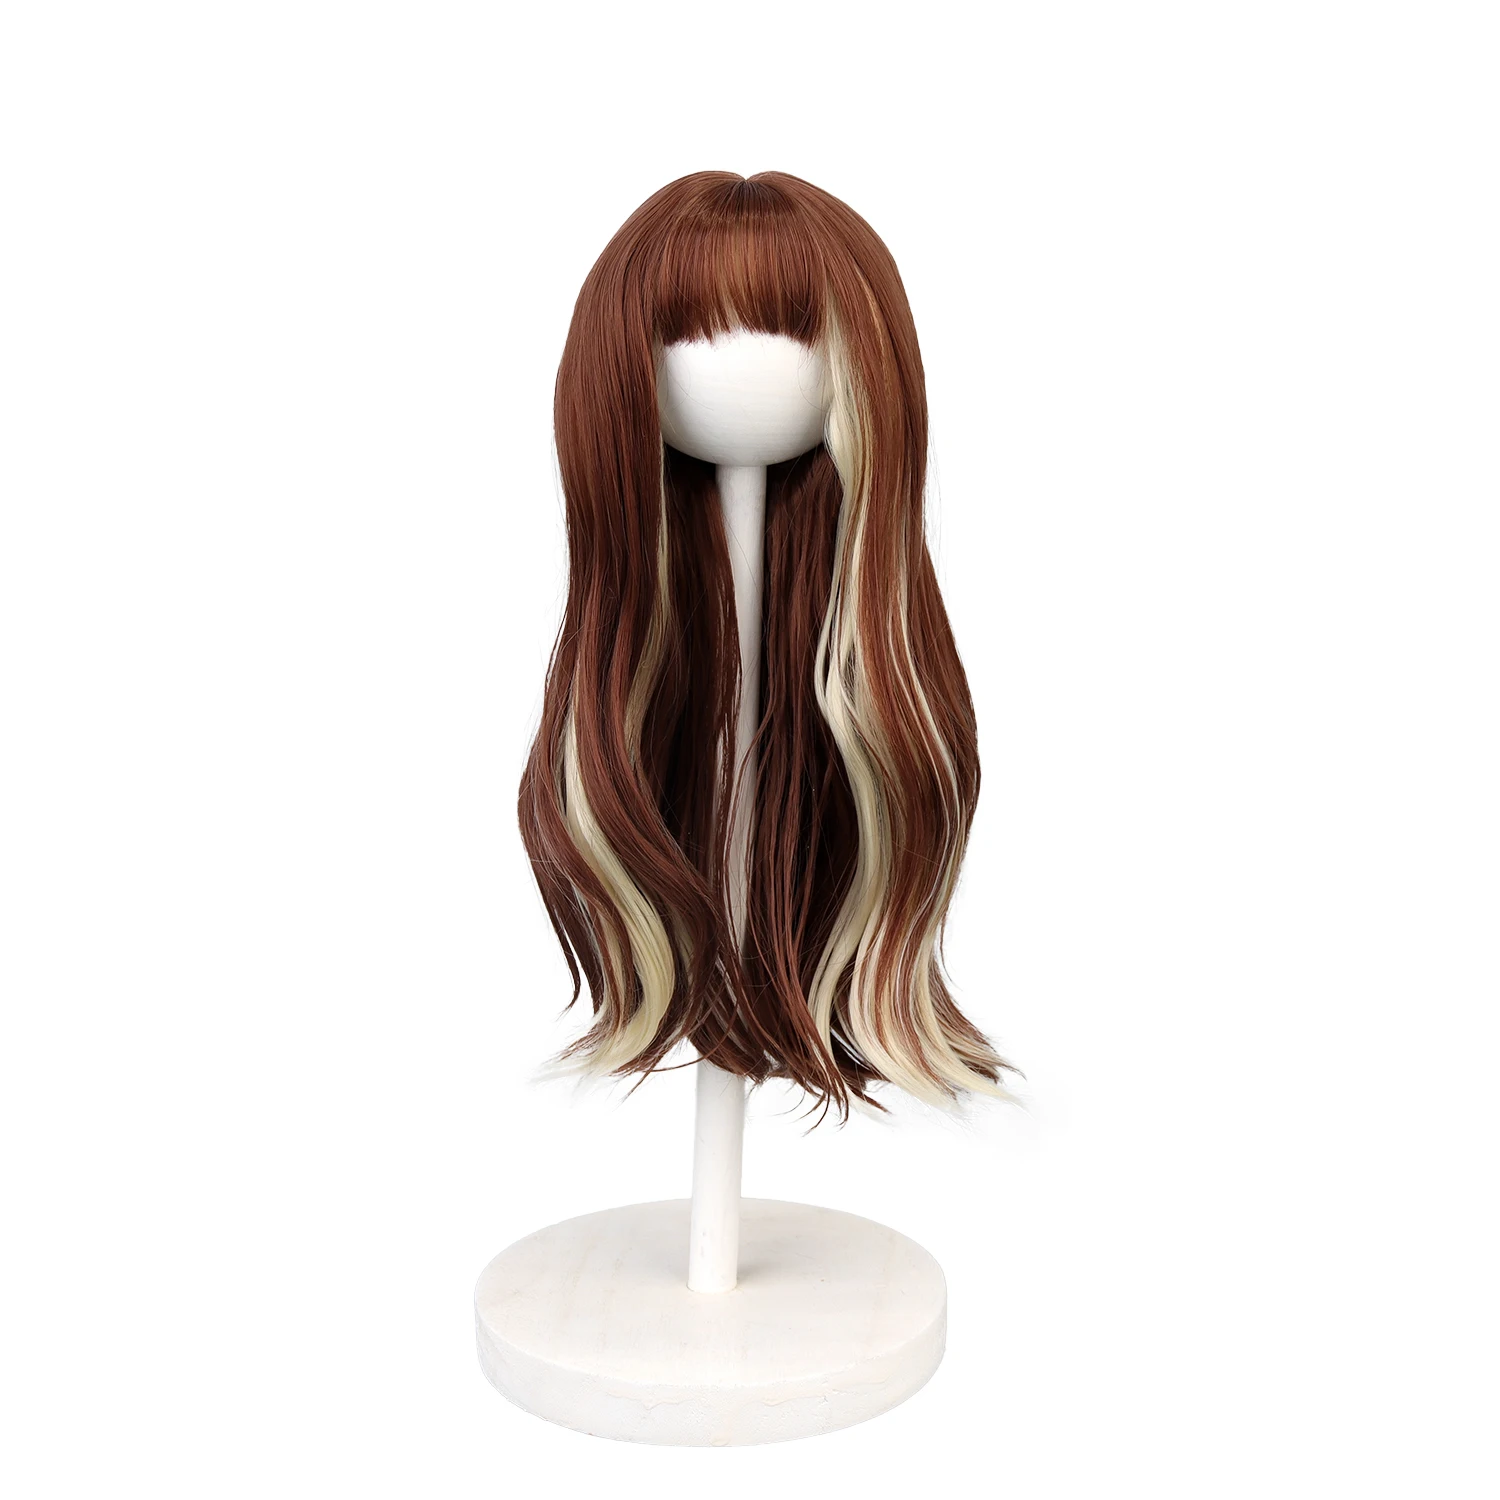 18 Inch American Doll Wigs 27cm Head Circumference Long Wavy Red Brown Blonde Highlight  High Temperature Hair For Doll Girls shine ash brown long straight good quality synthetic wig ash blonde wig for woman 150% 30 none lace full machine made wig